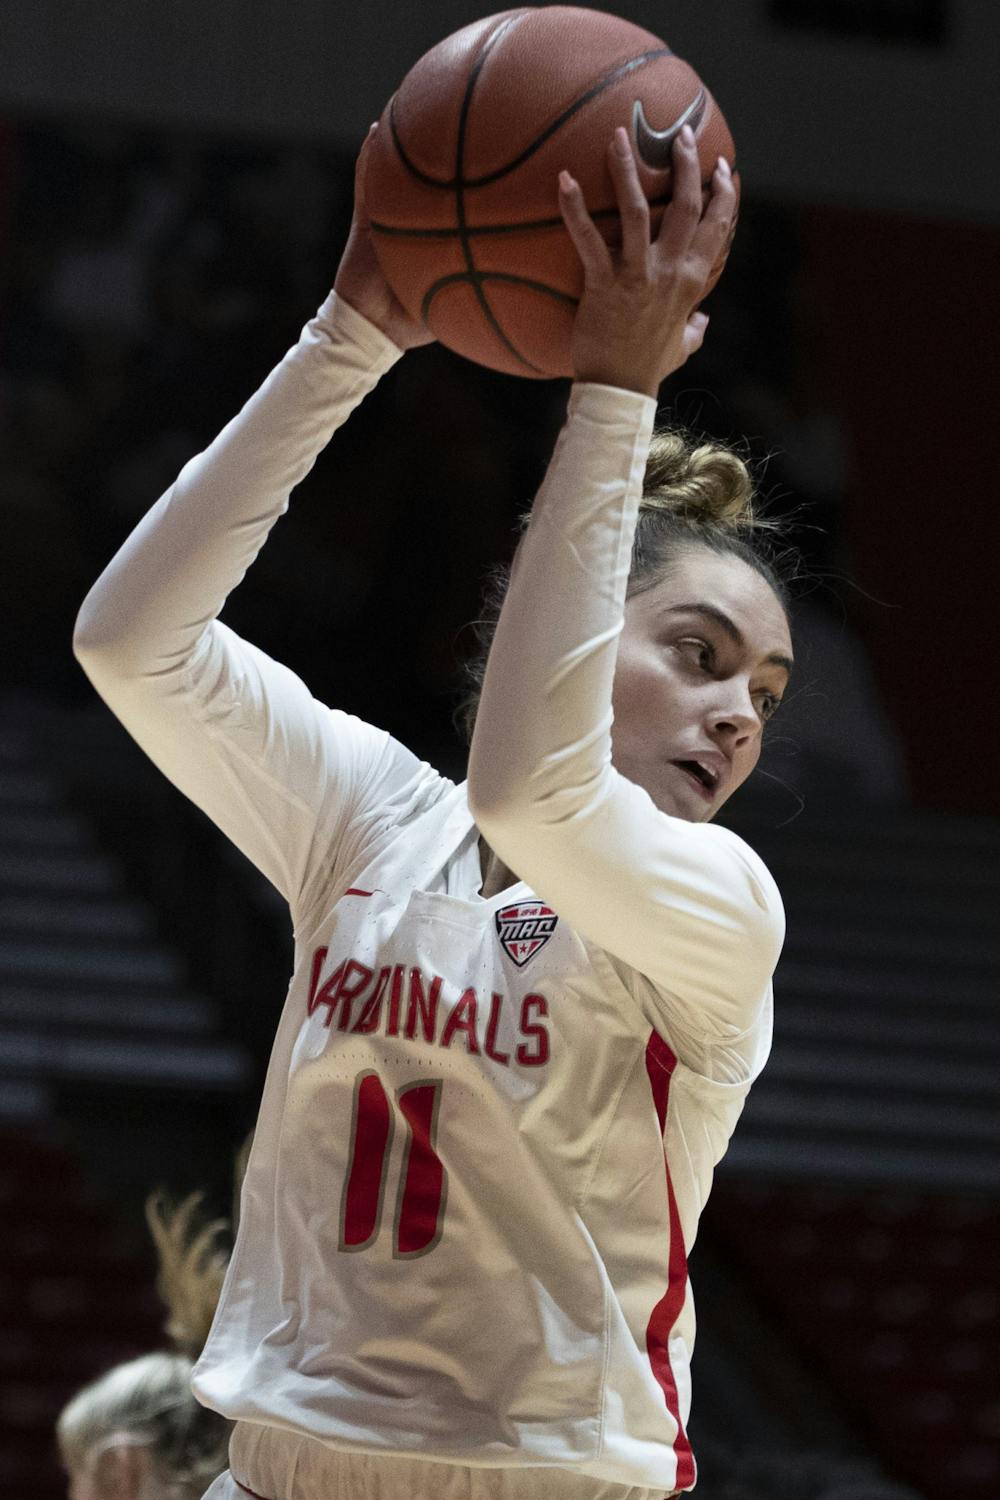 Ball State Cardinals sophomore guard Sydney Freeman catches a rebound Dec. 2, 2020, at John E. Worthen Arena. Freeman scored 11 points against the Eagles. Jacob Musselman, DN